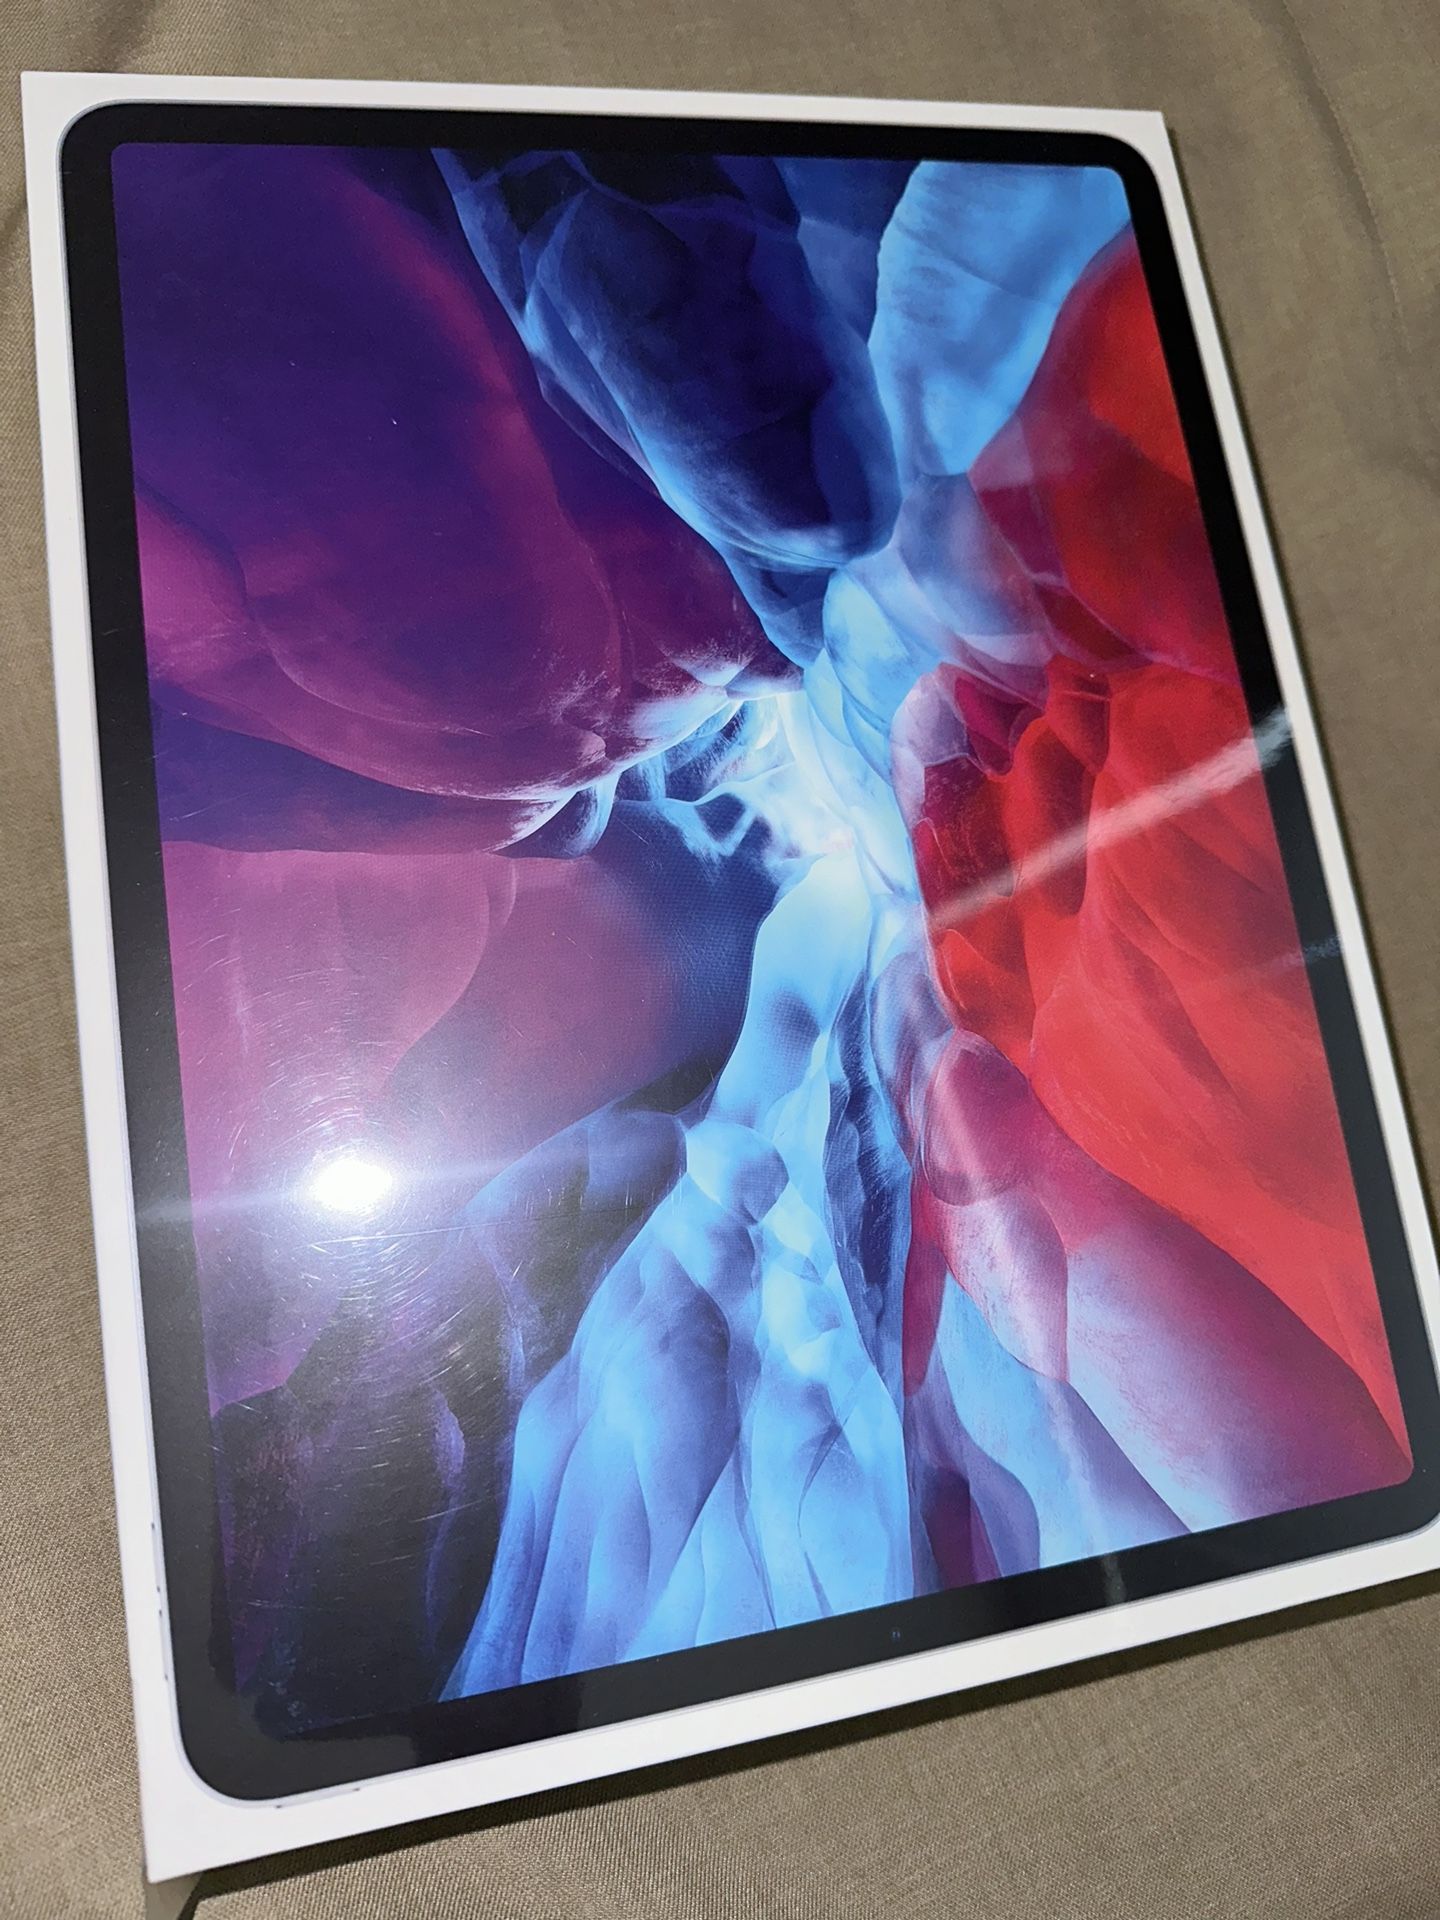 12.9 Silver Apple iPad Pro 512gb WiFi 4th Generation 100% New Never Activated 